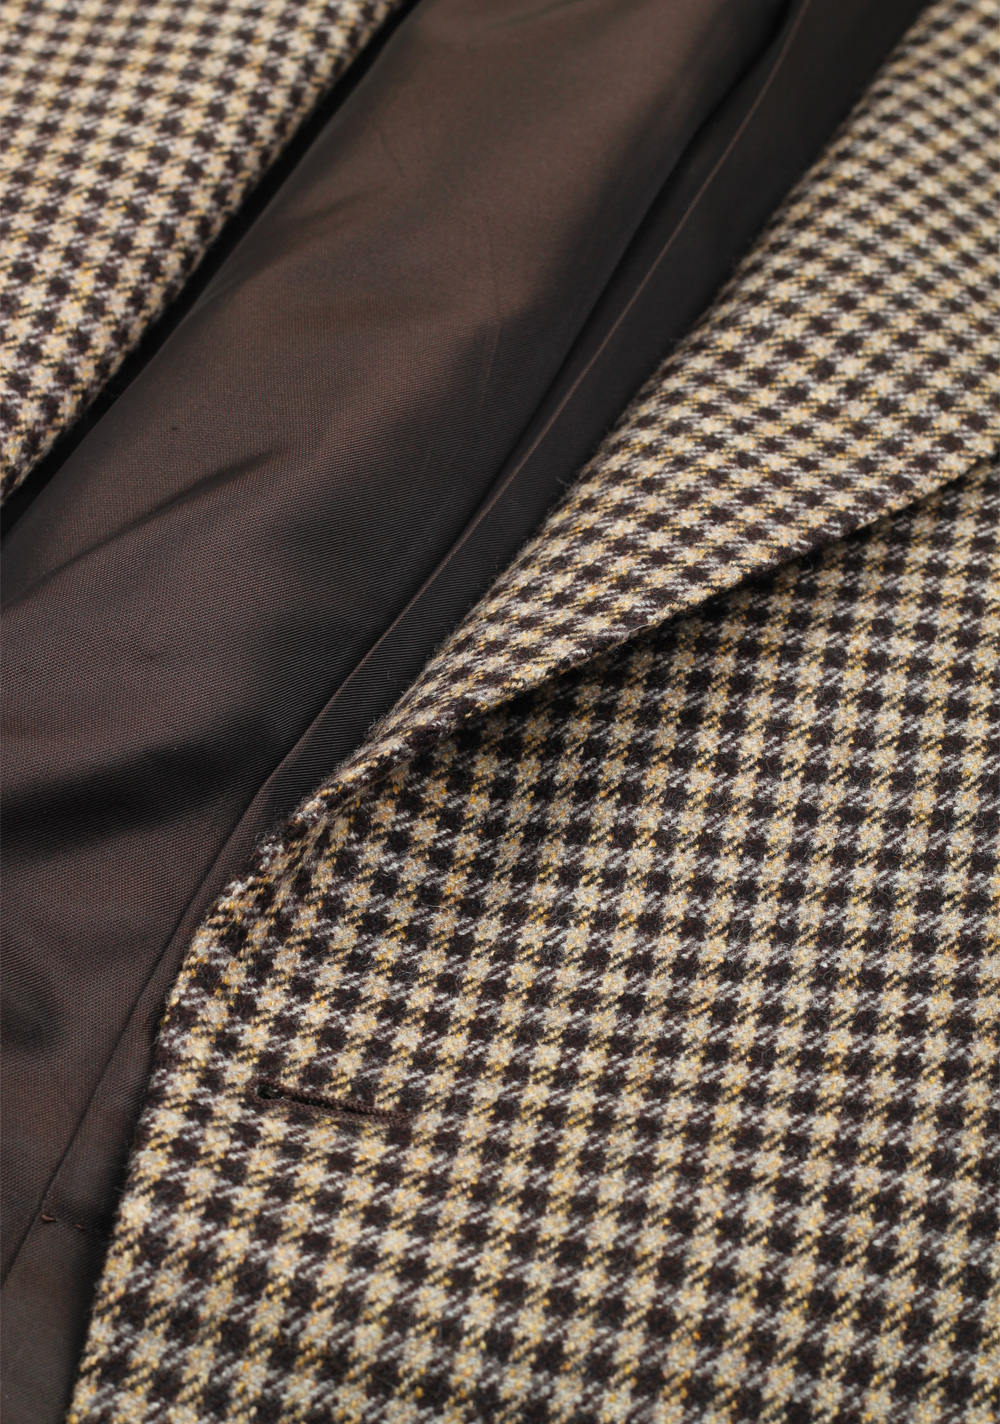 TOM FORD Shelton Checked Brownish Gray Sport Coat | Costume Limité